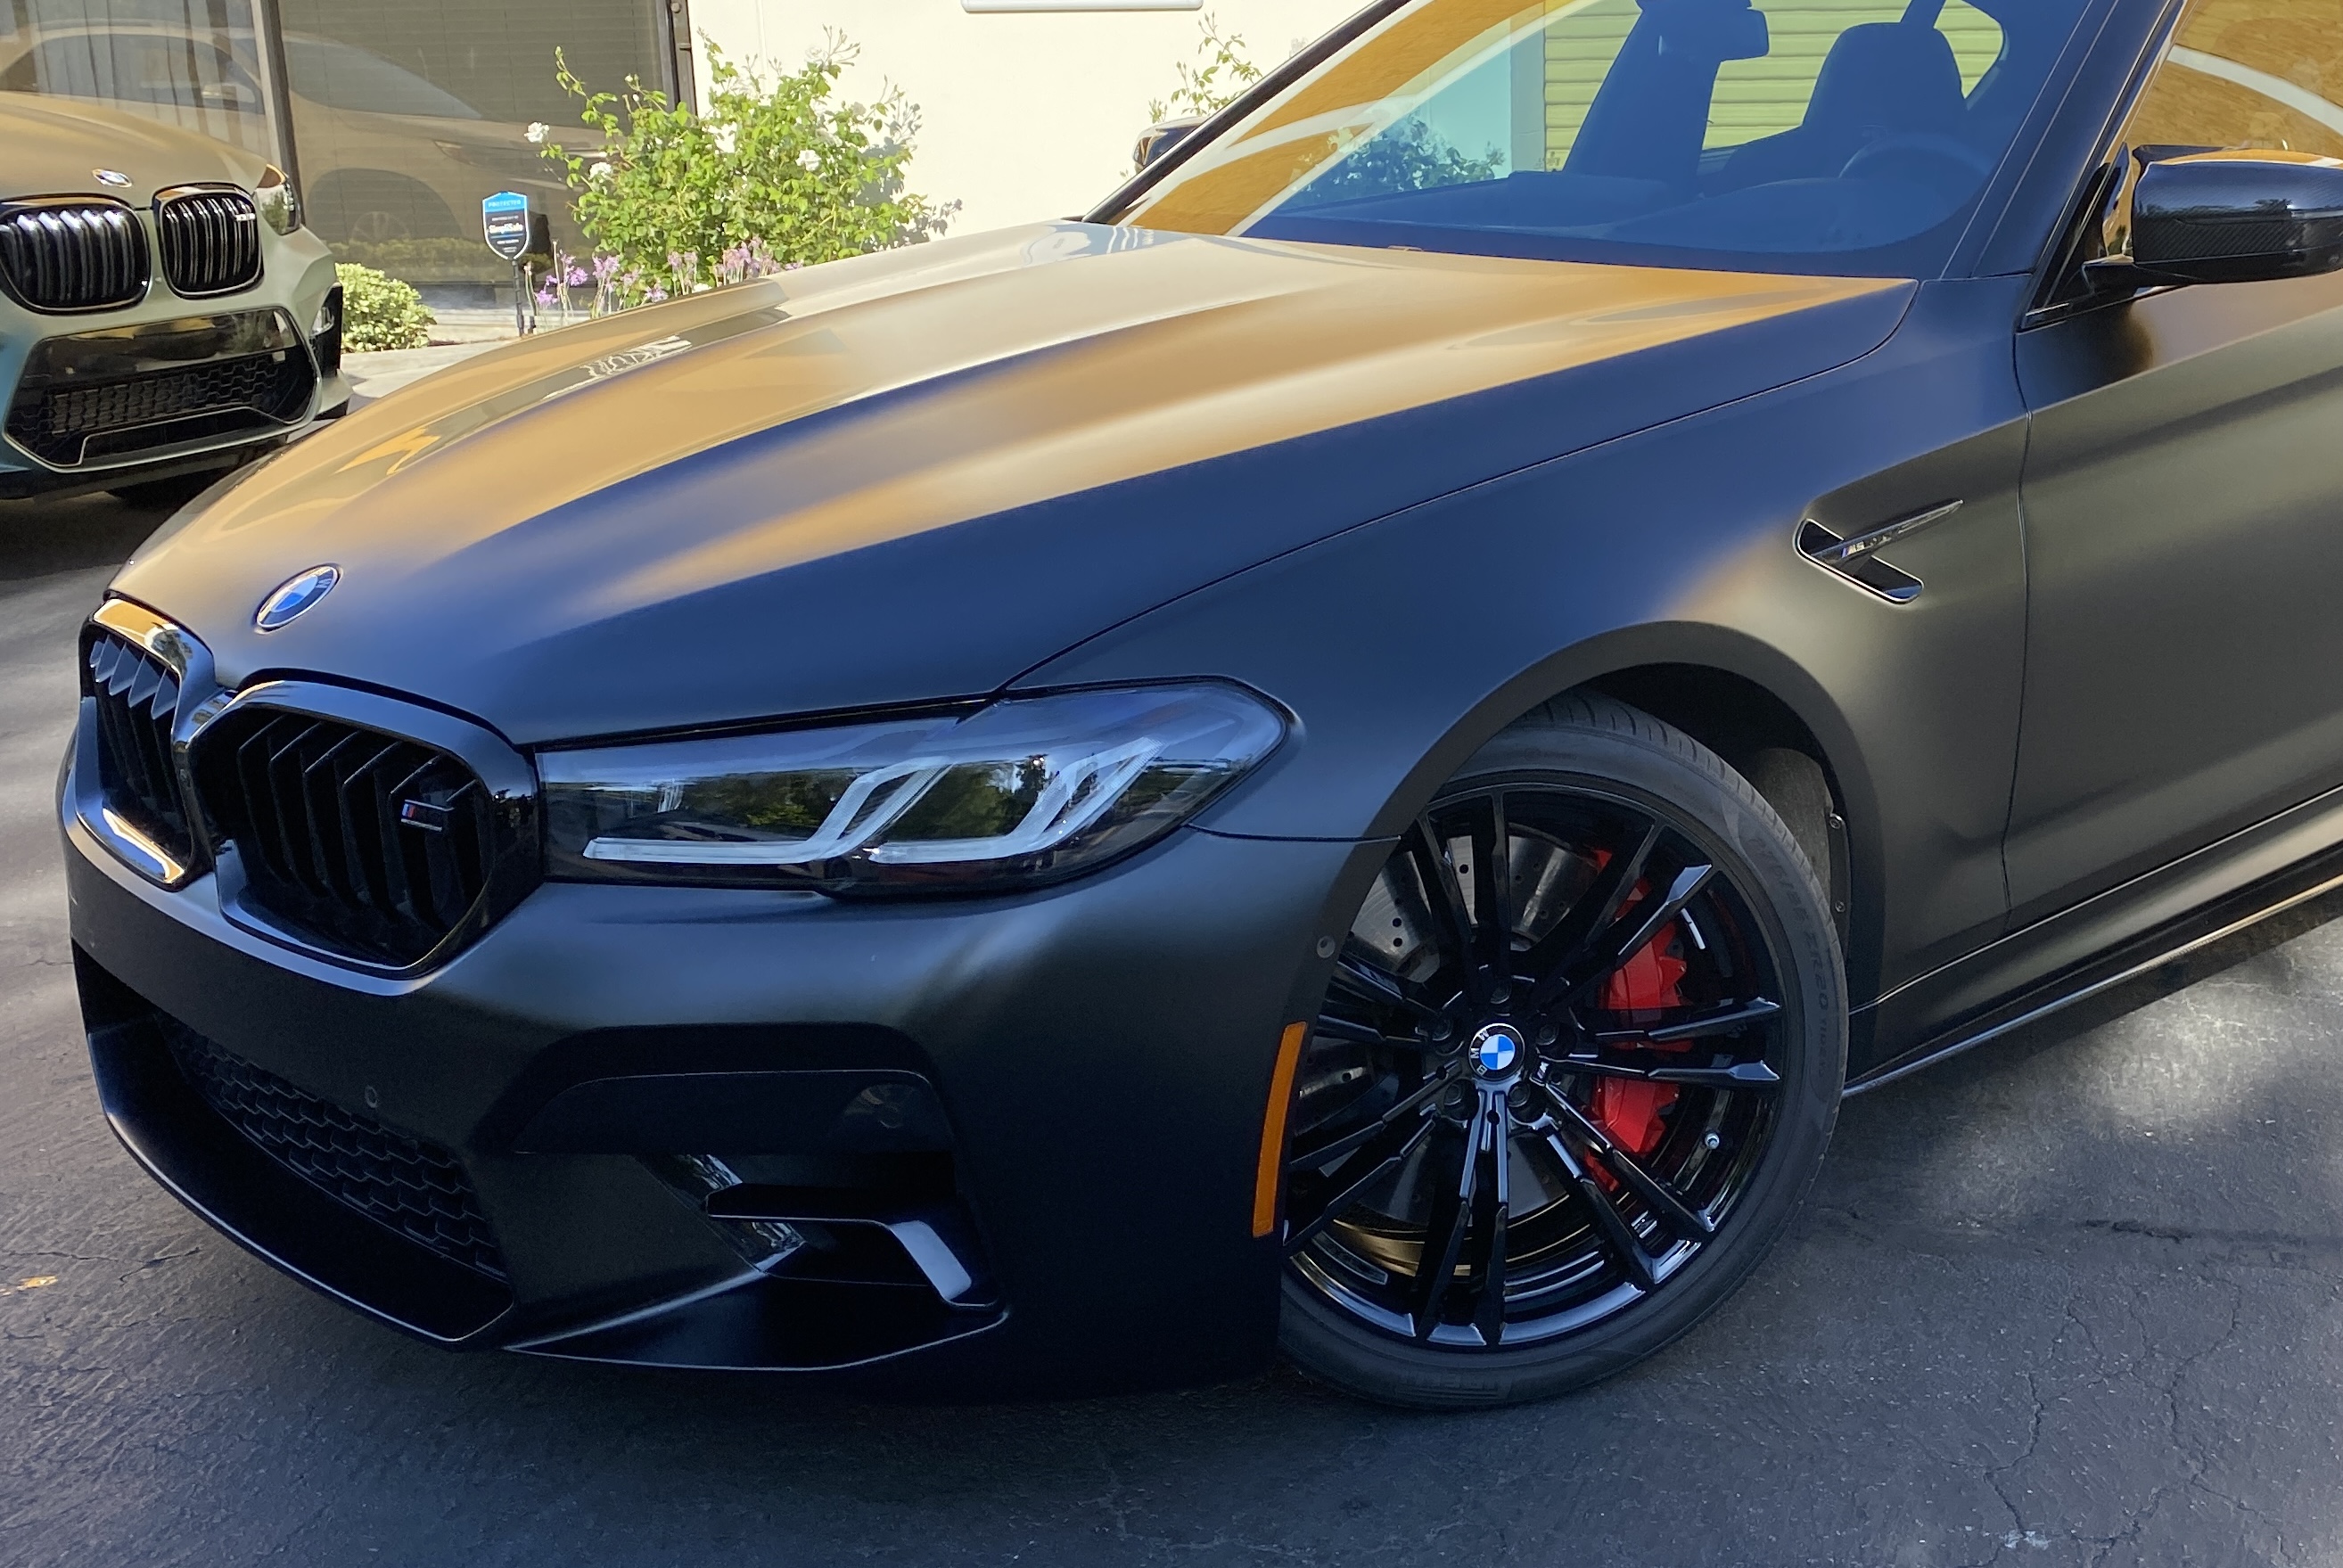 Used BMW M5 for Sale Near West Hollywood, CA